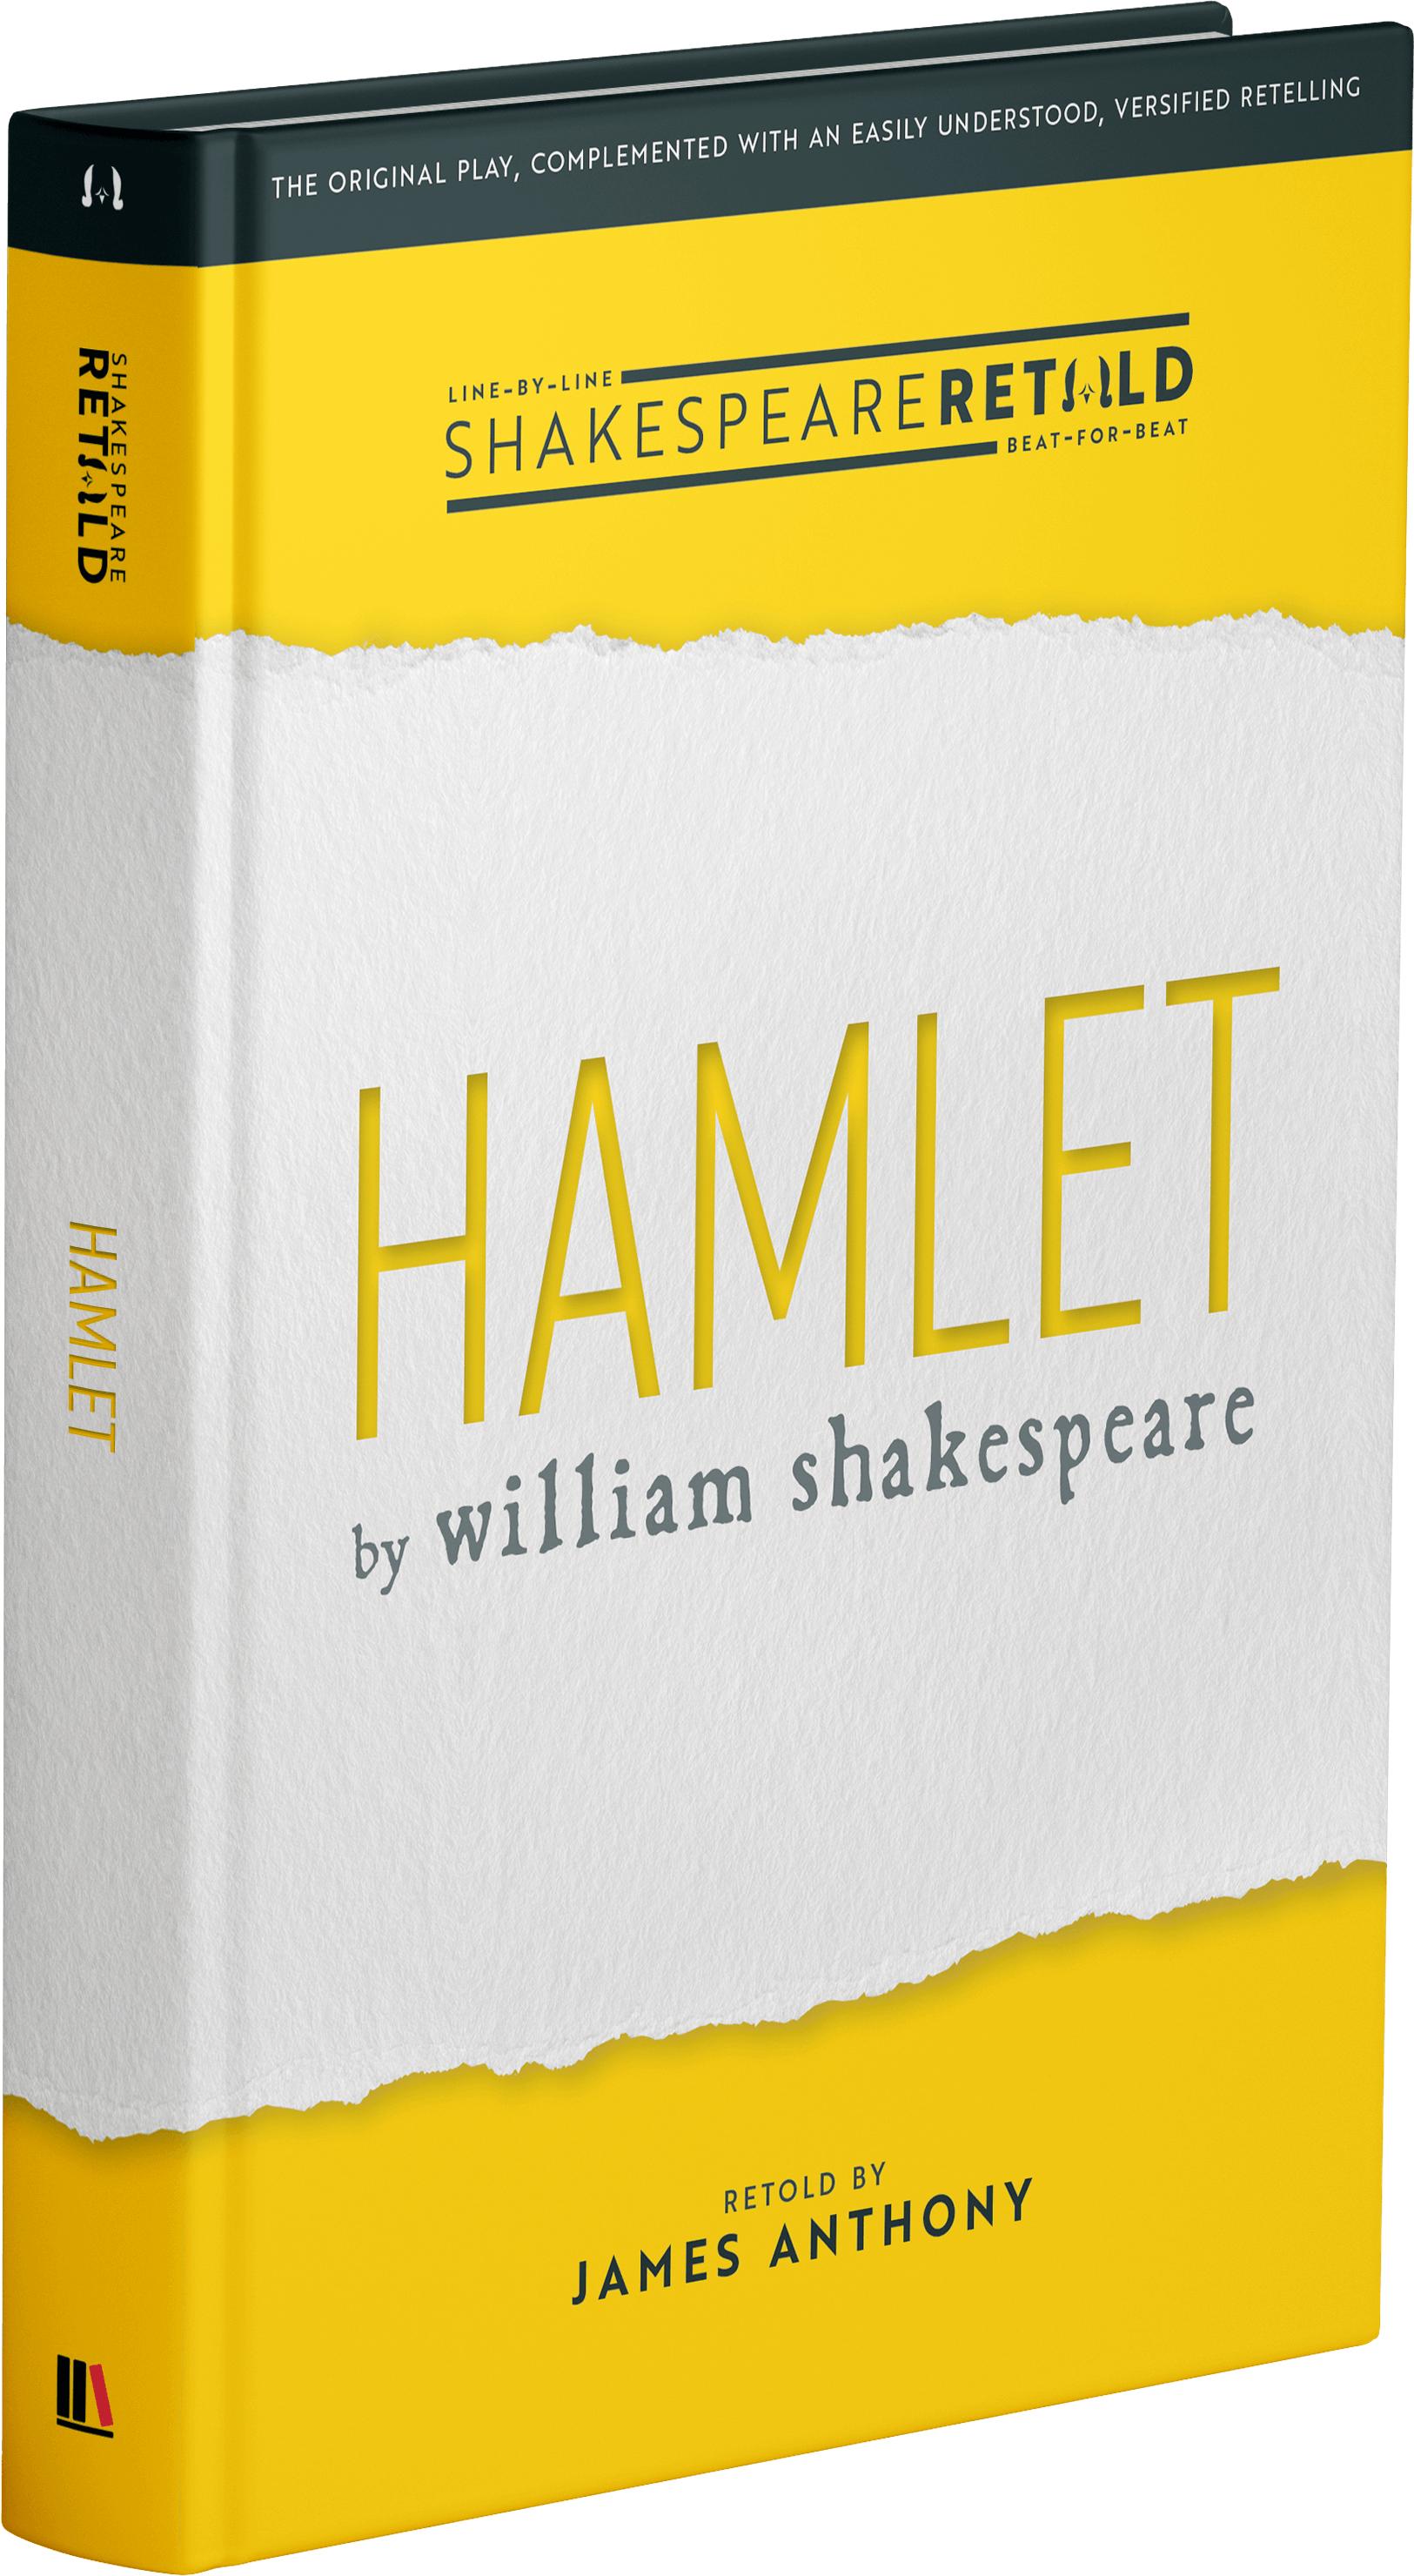 The cover image of Shakespeare Retold: Hamlet